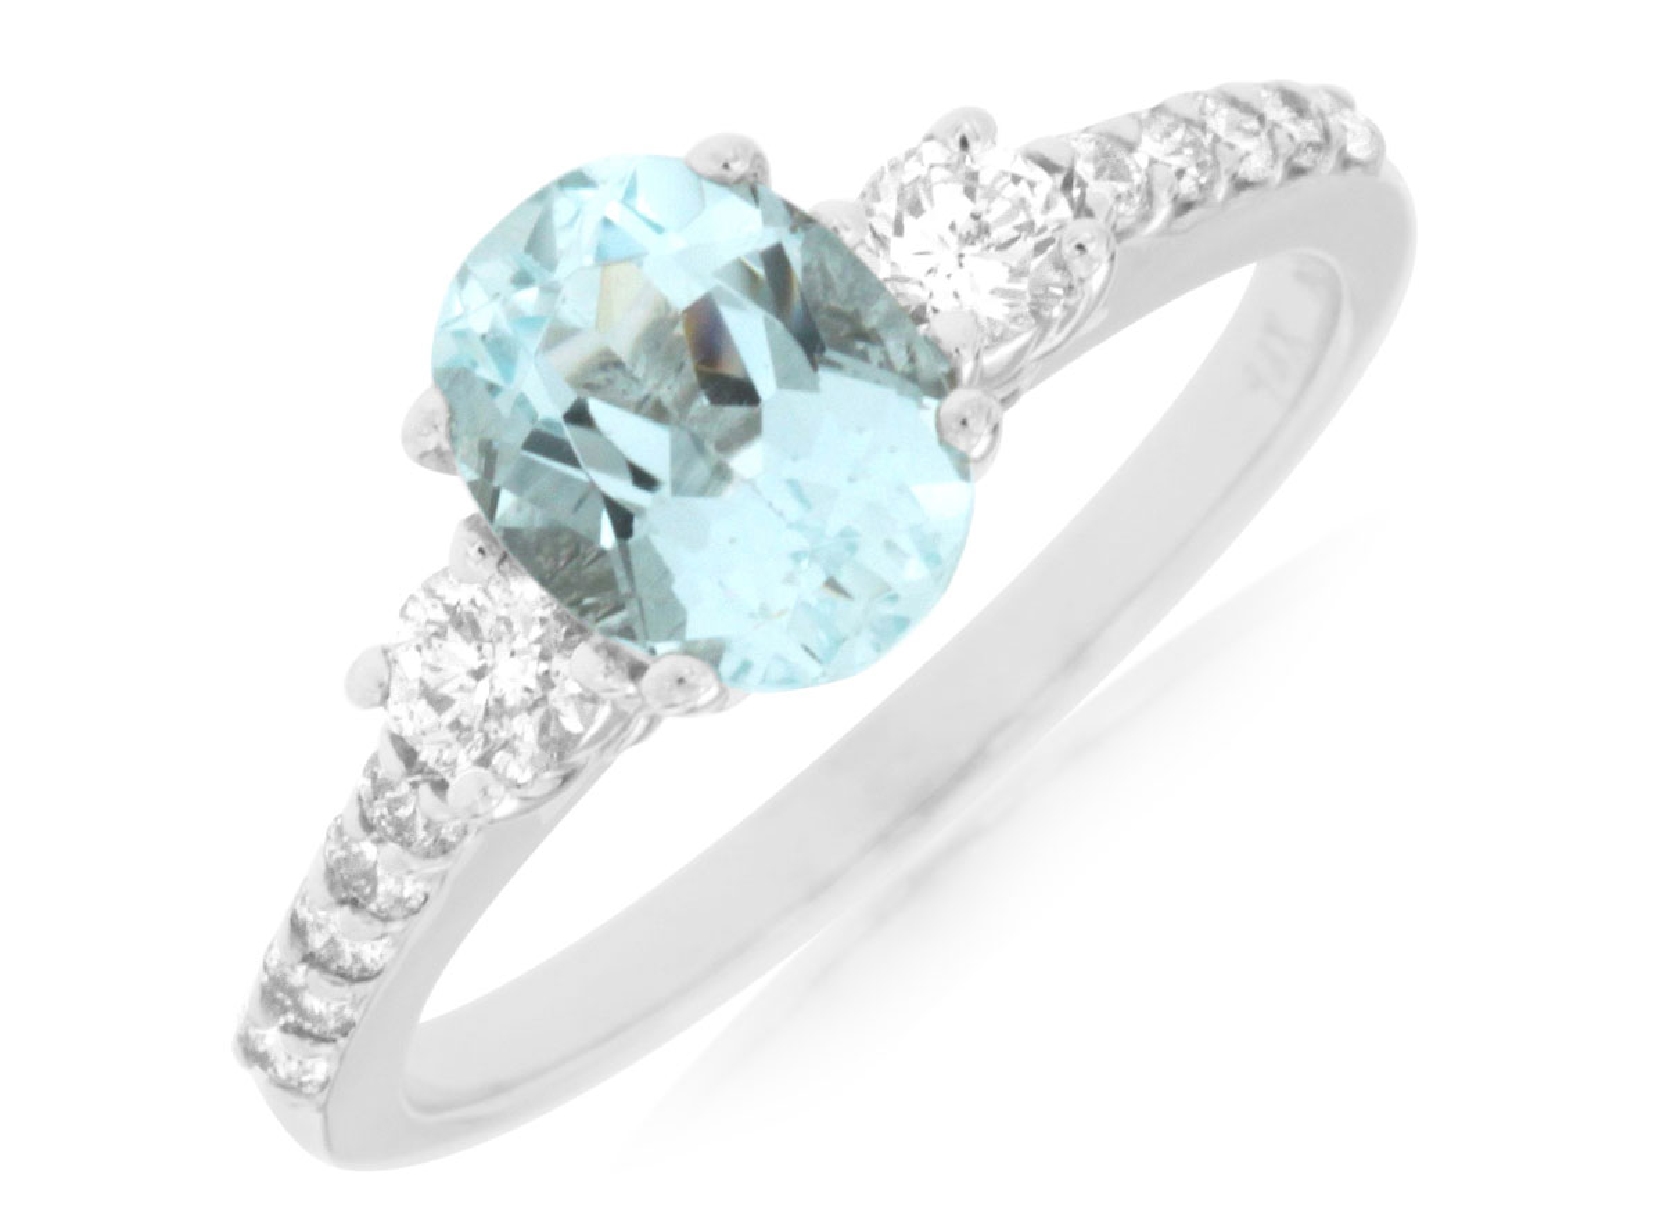 14K White Gold Oval Aquamarine Ring with Diamond Accents and Diamond Shank; Size 7